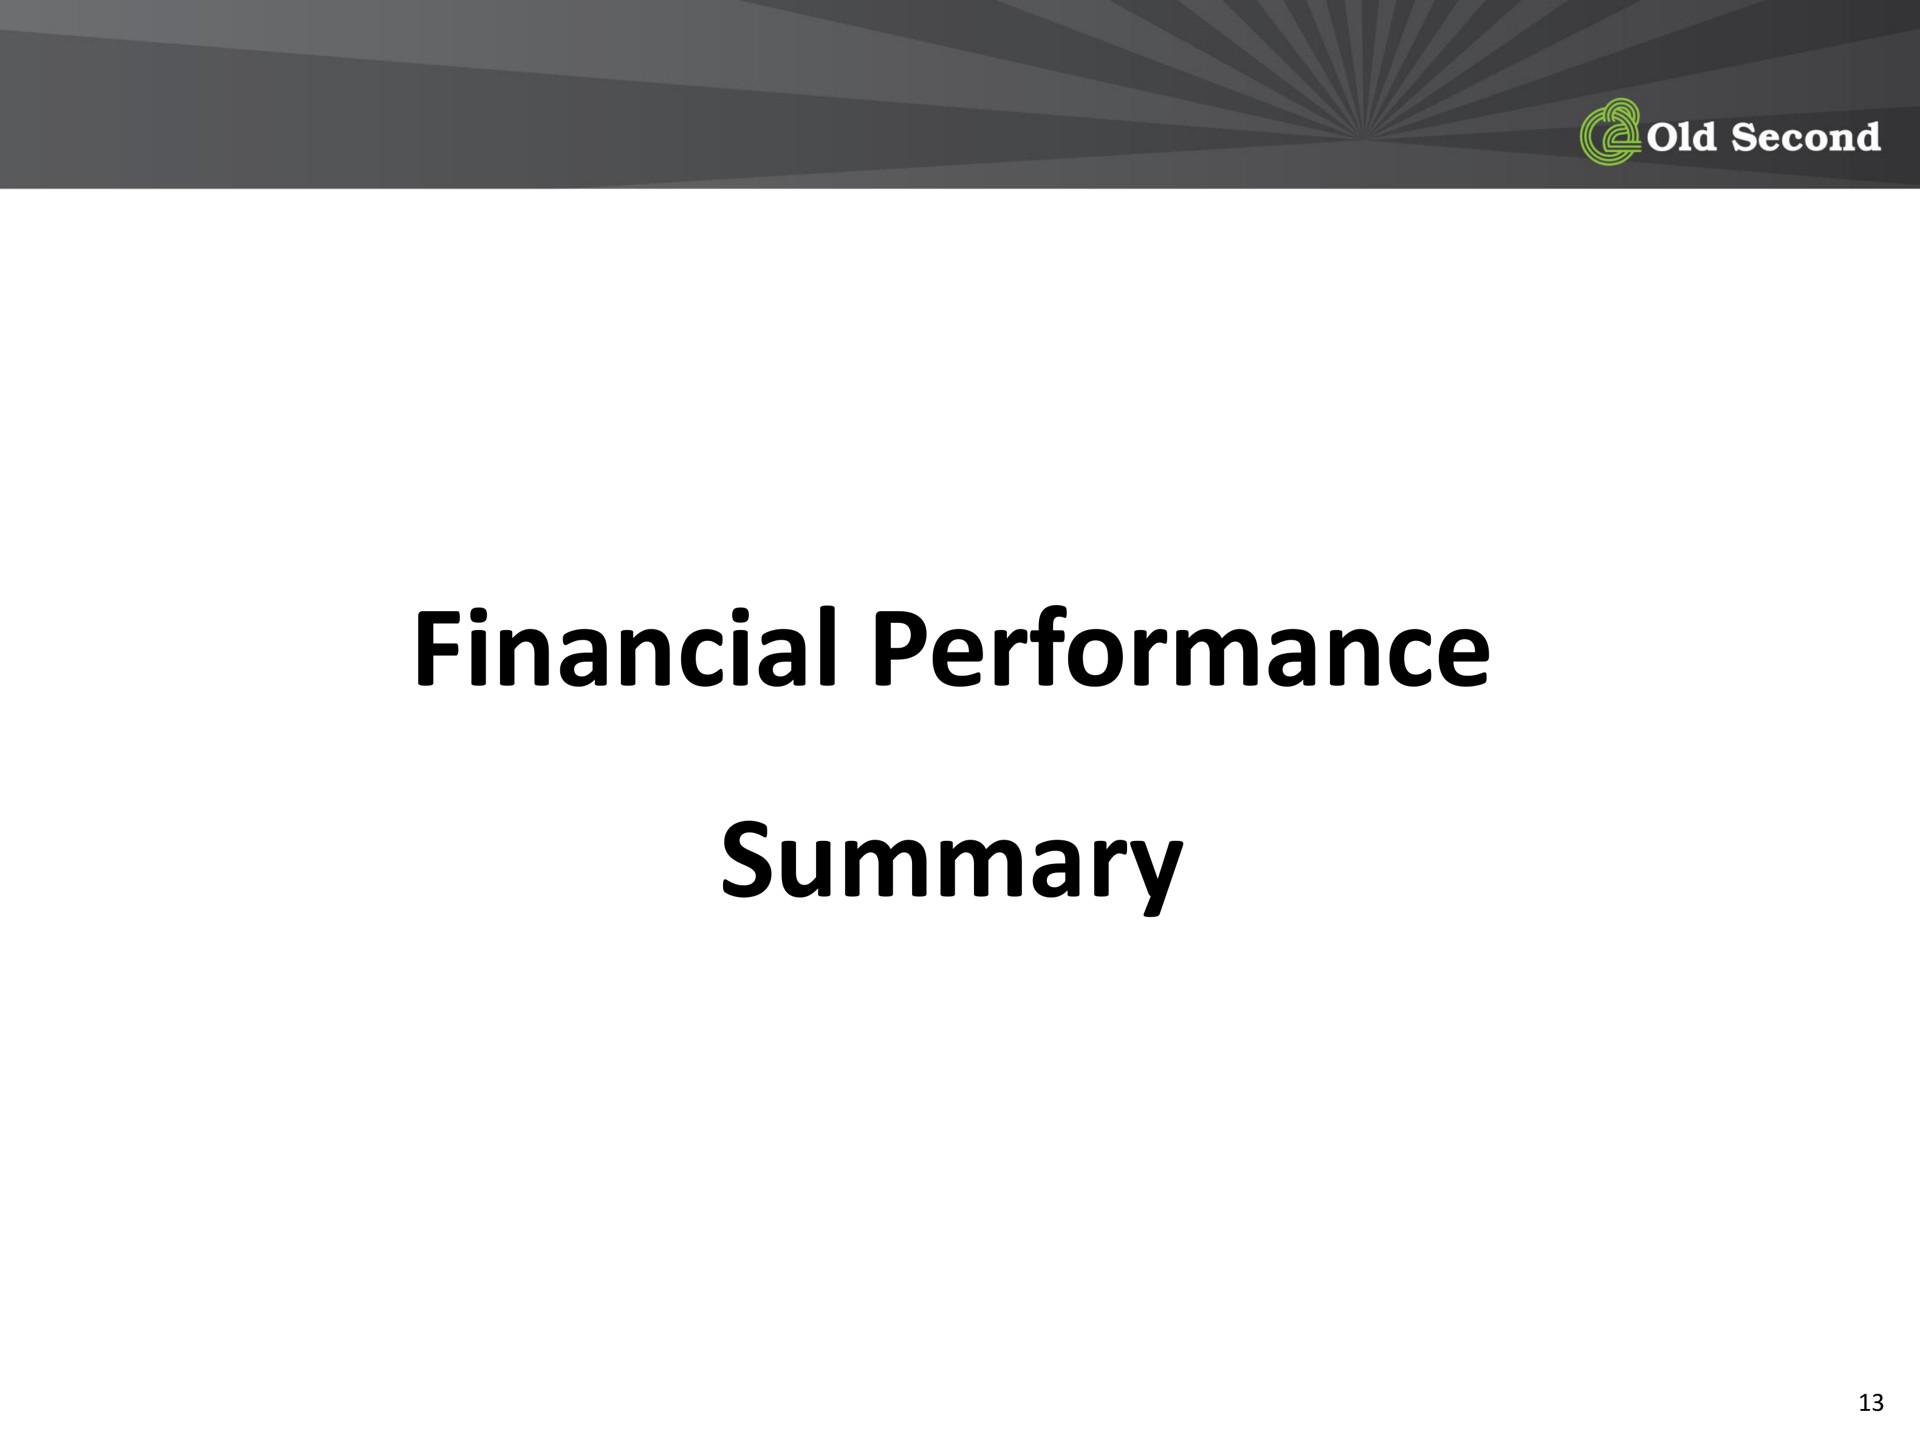 financial performance summary | Old Second Bancorp